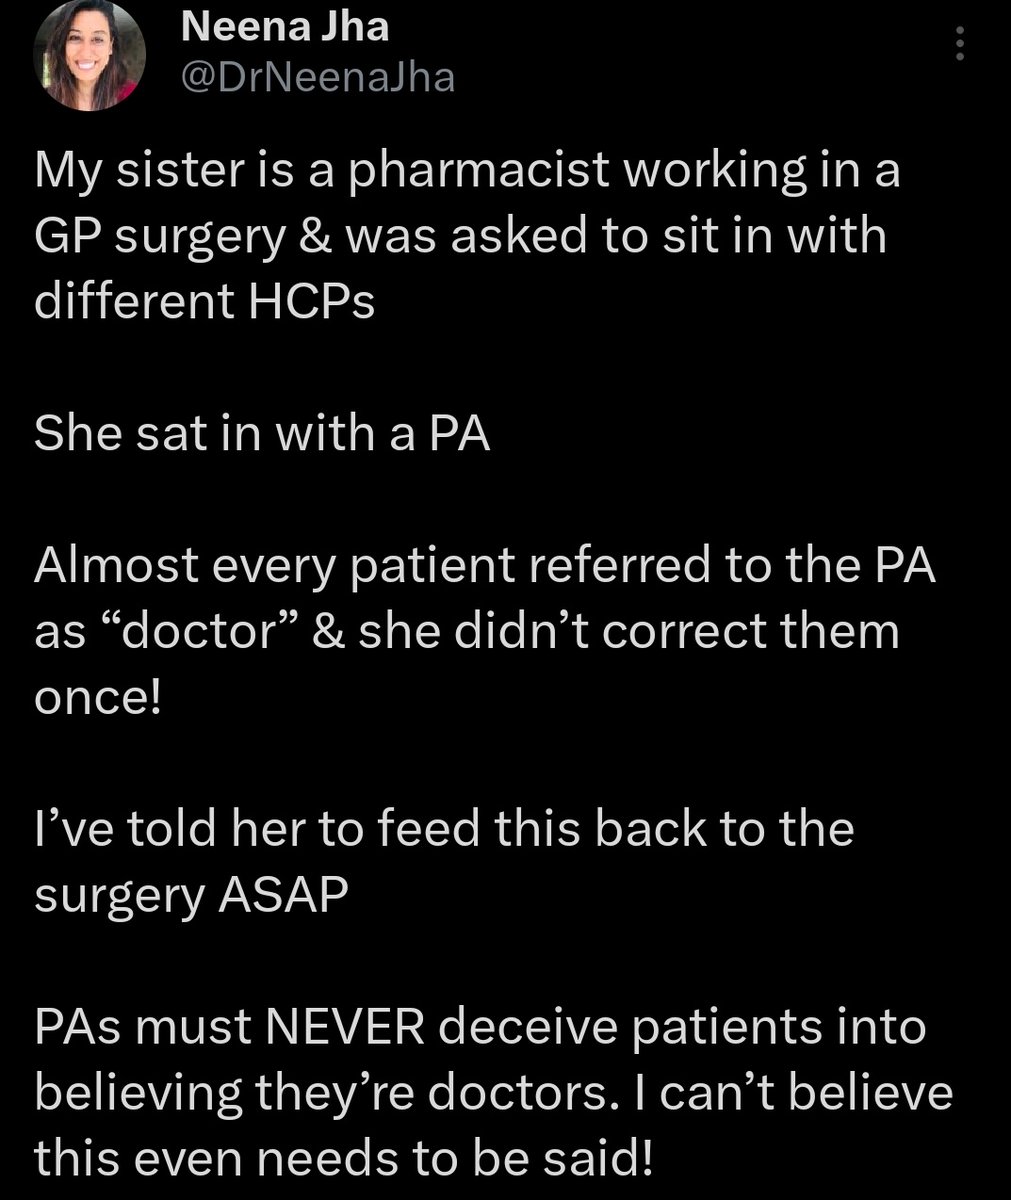 These have been posted within an hour of eachother and make for terrifying reading Who do we still need to convince that Drs are being replaced? @DrAsifQasim @DrNeenaJha